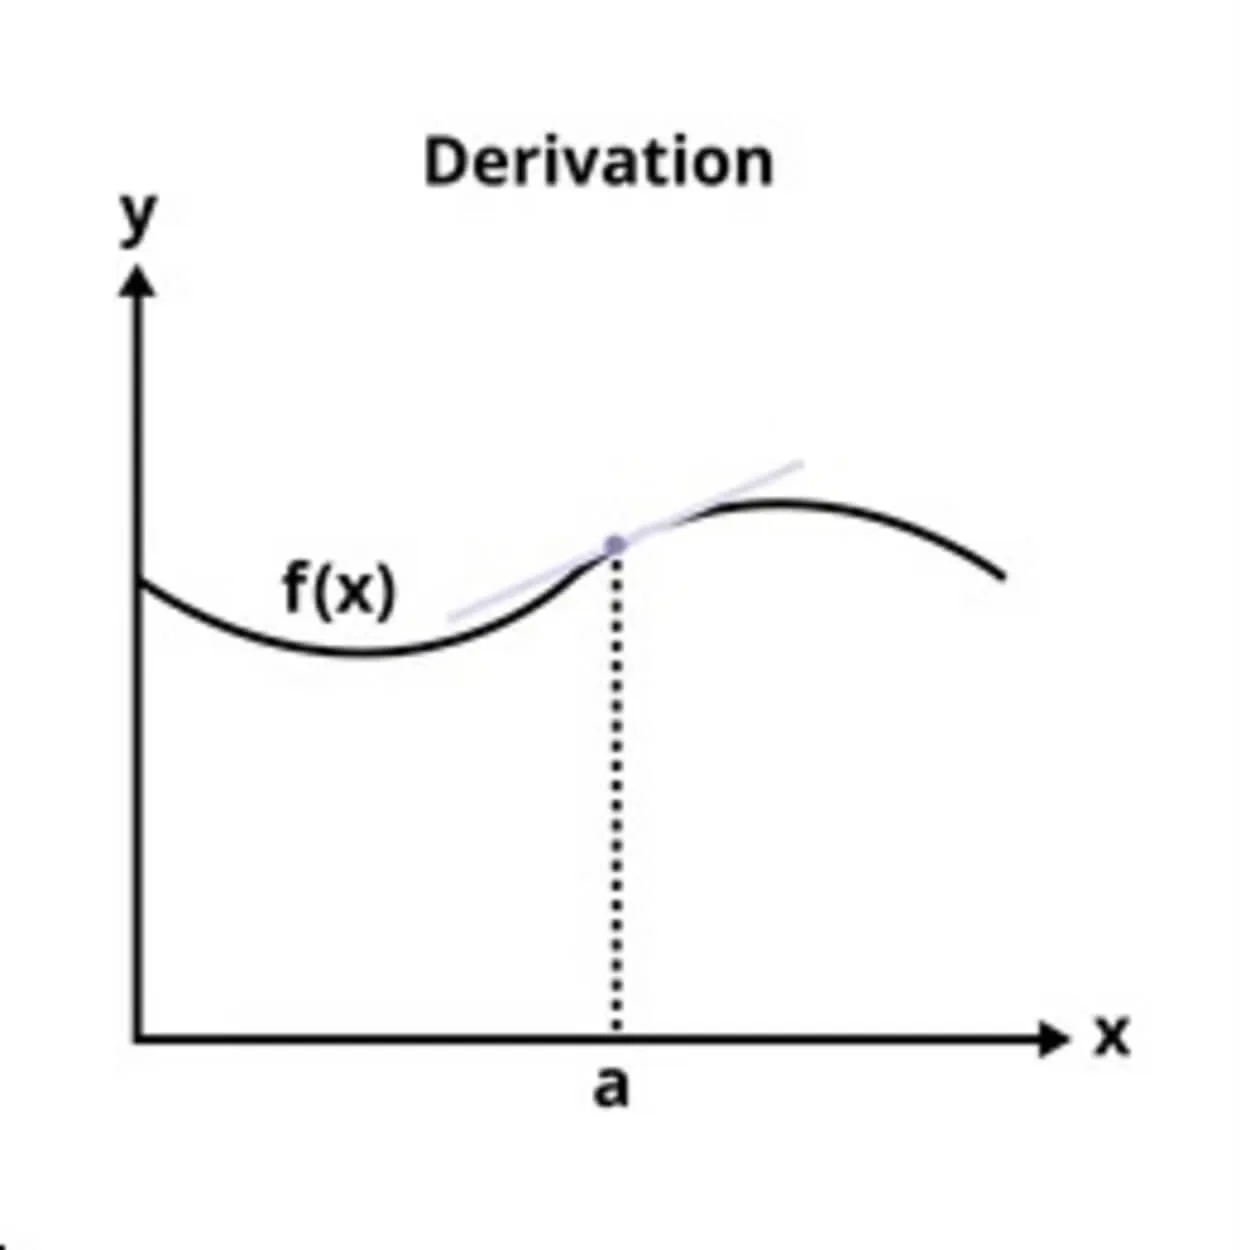 d2y/d2x is the second derivative